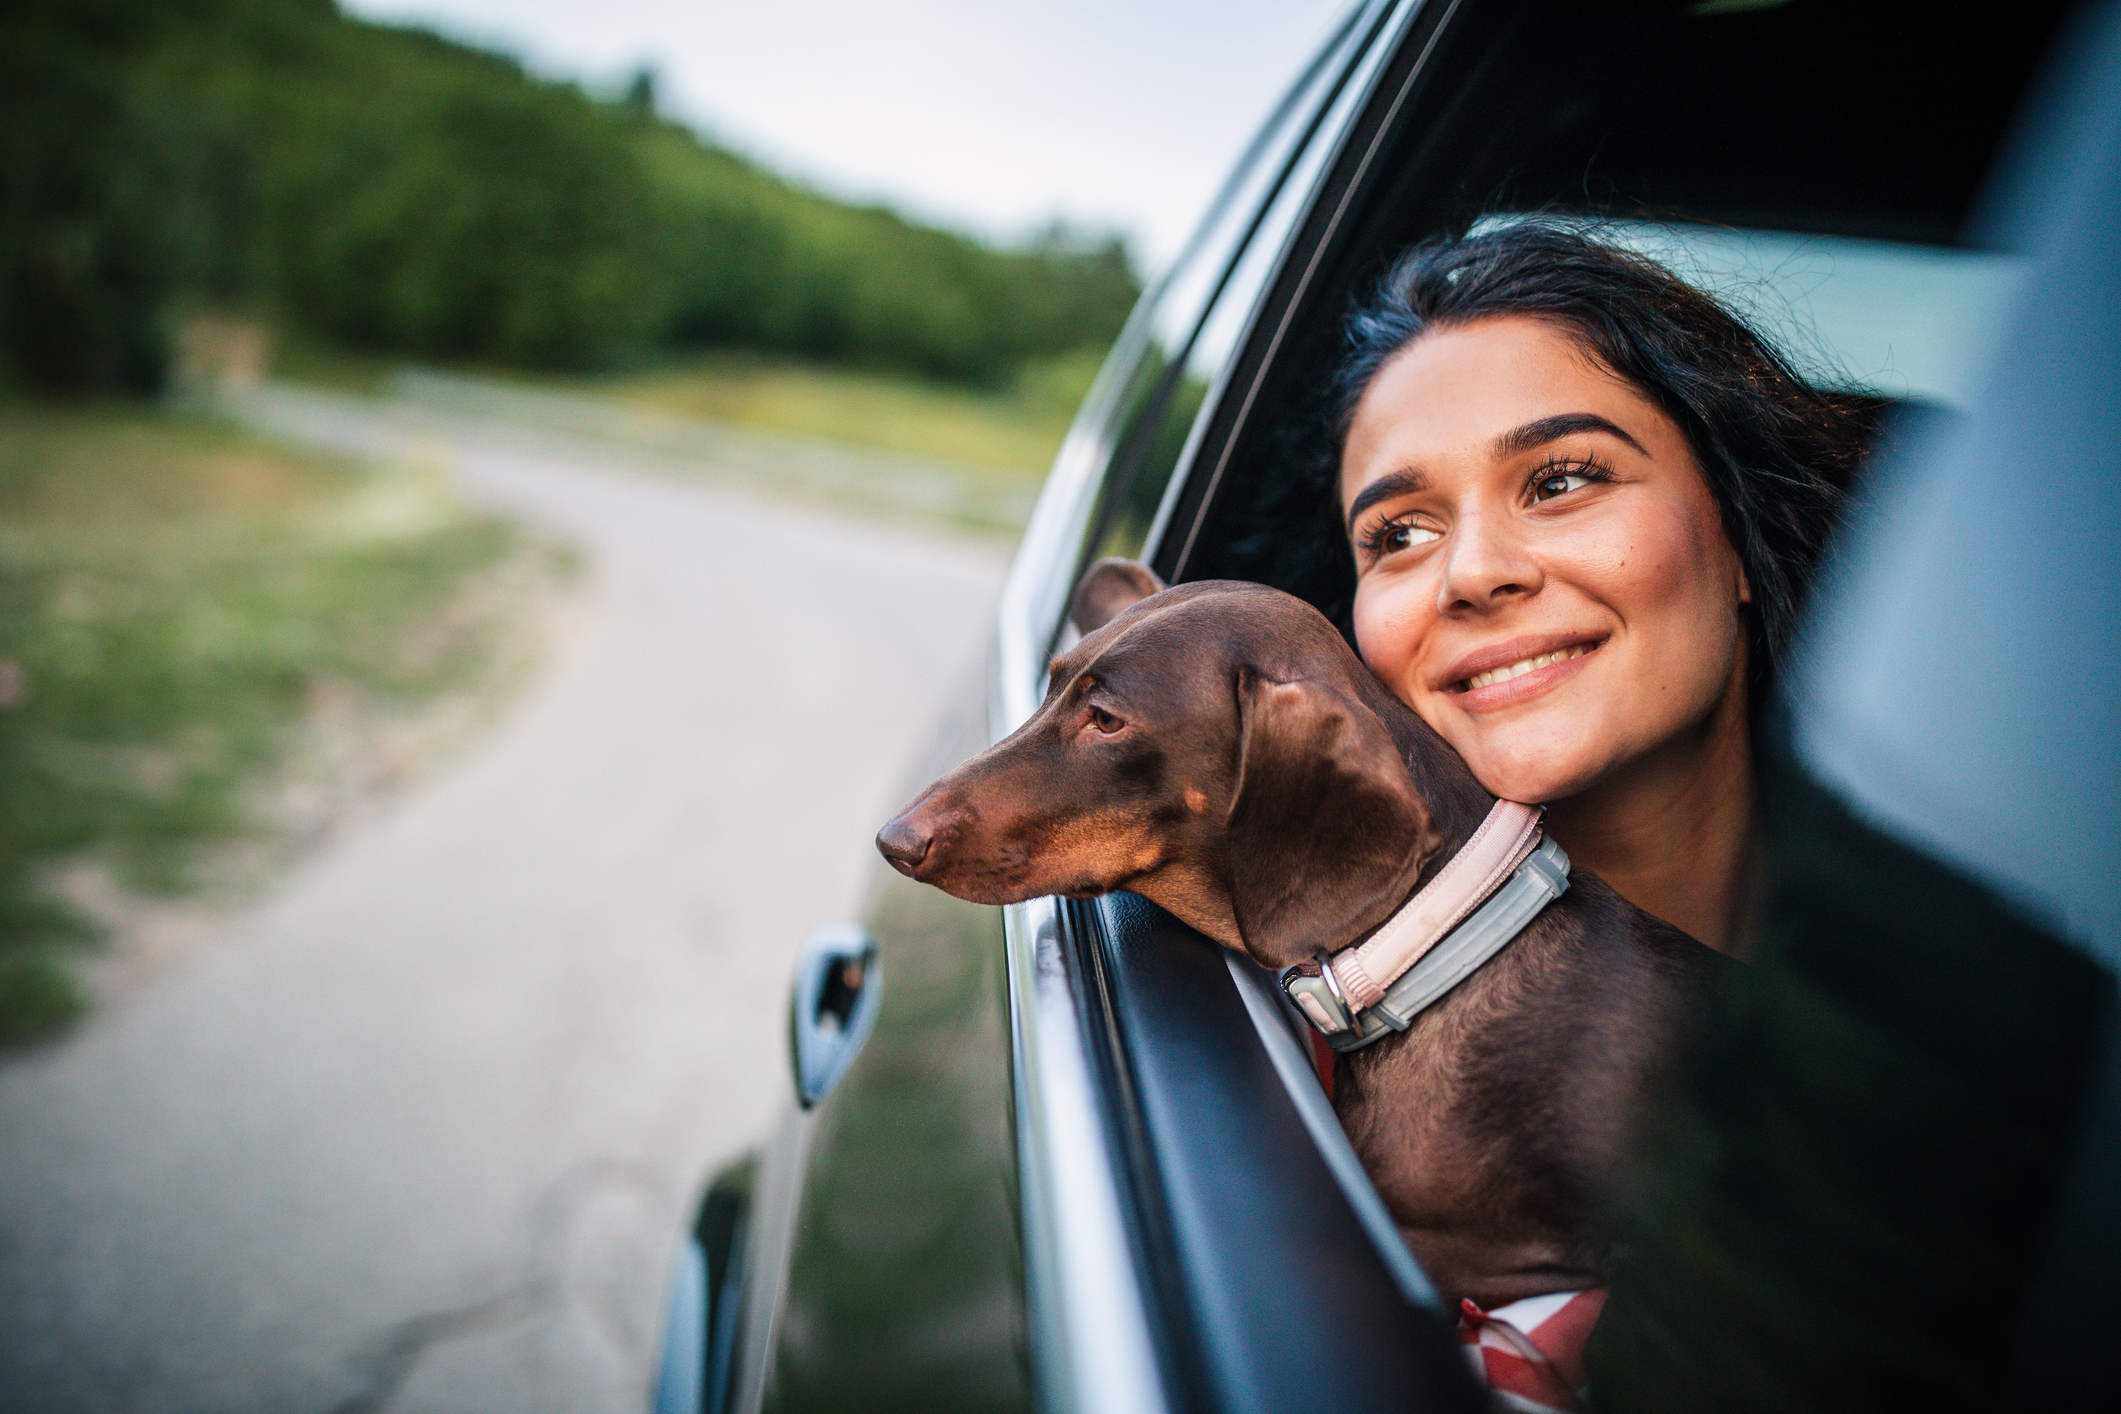 Reasons Why Dogs Make the Best Travel Companions